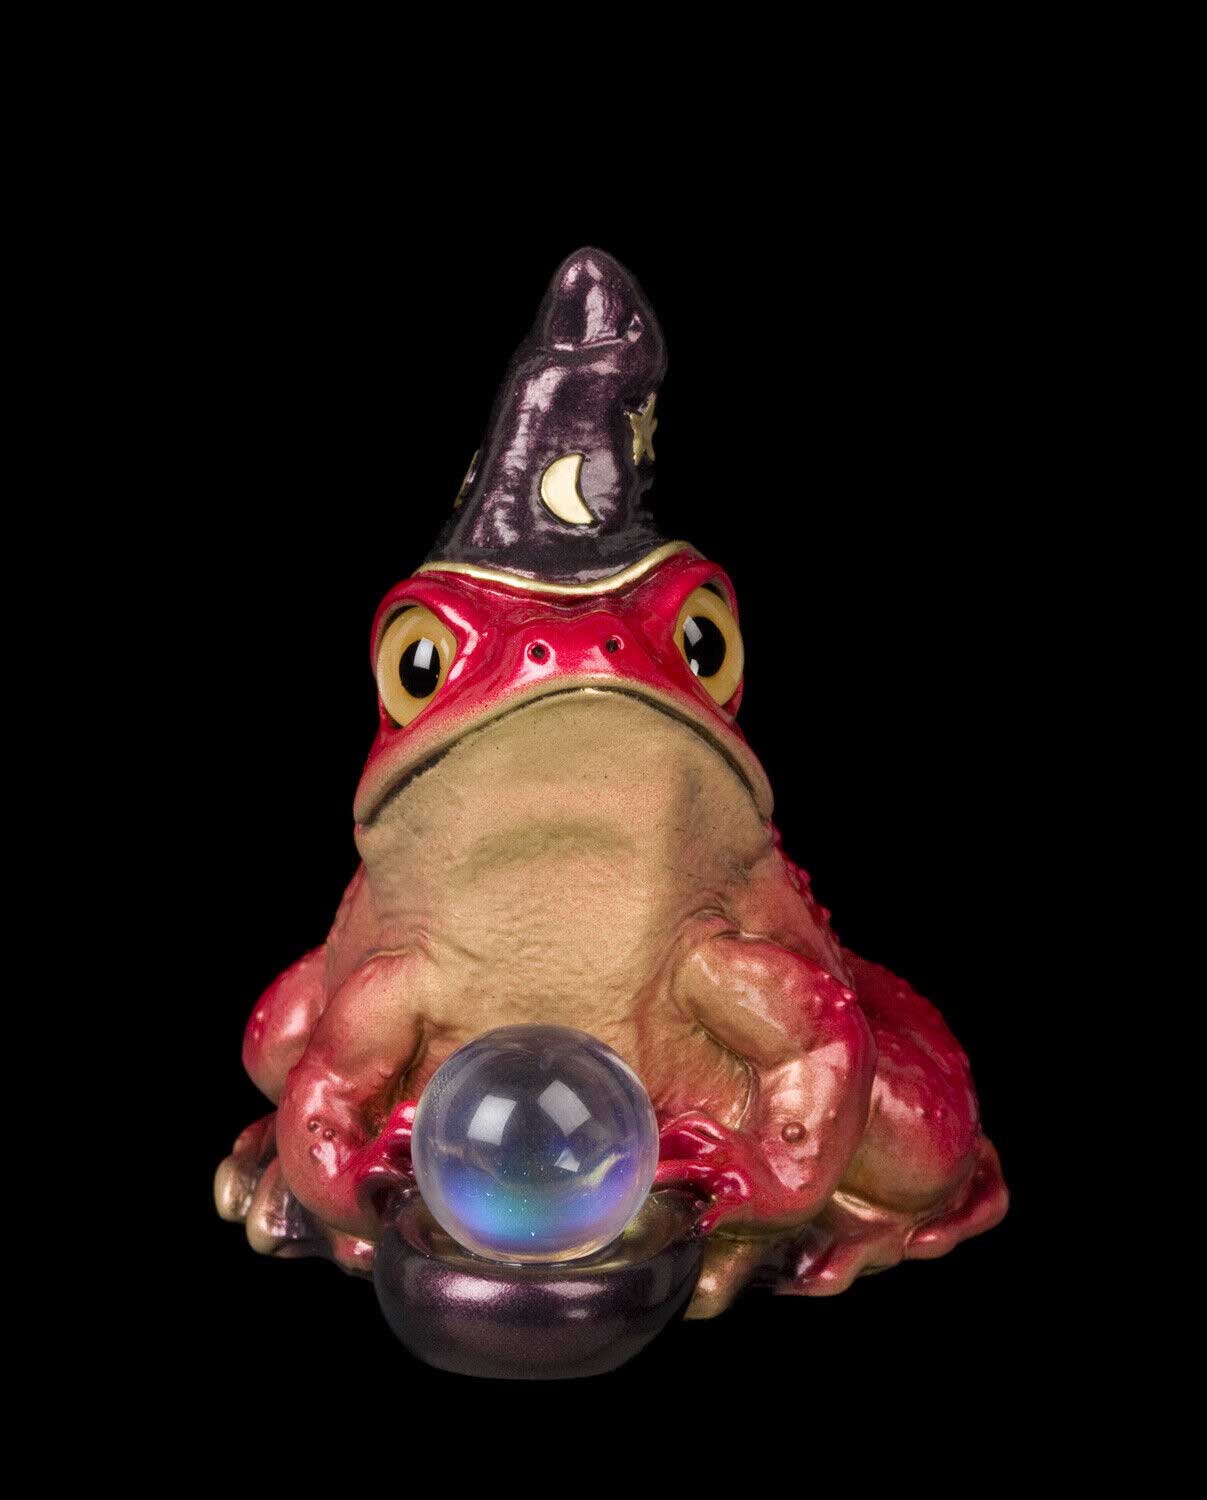 20221017-Twilight-Ruby-Frog-Wizard-Test-Paint-1-by-Gina